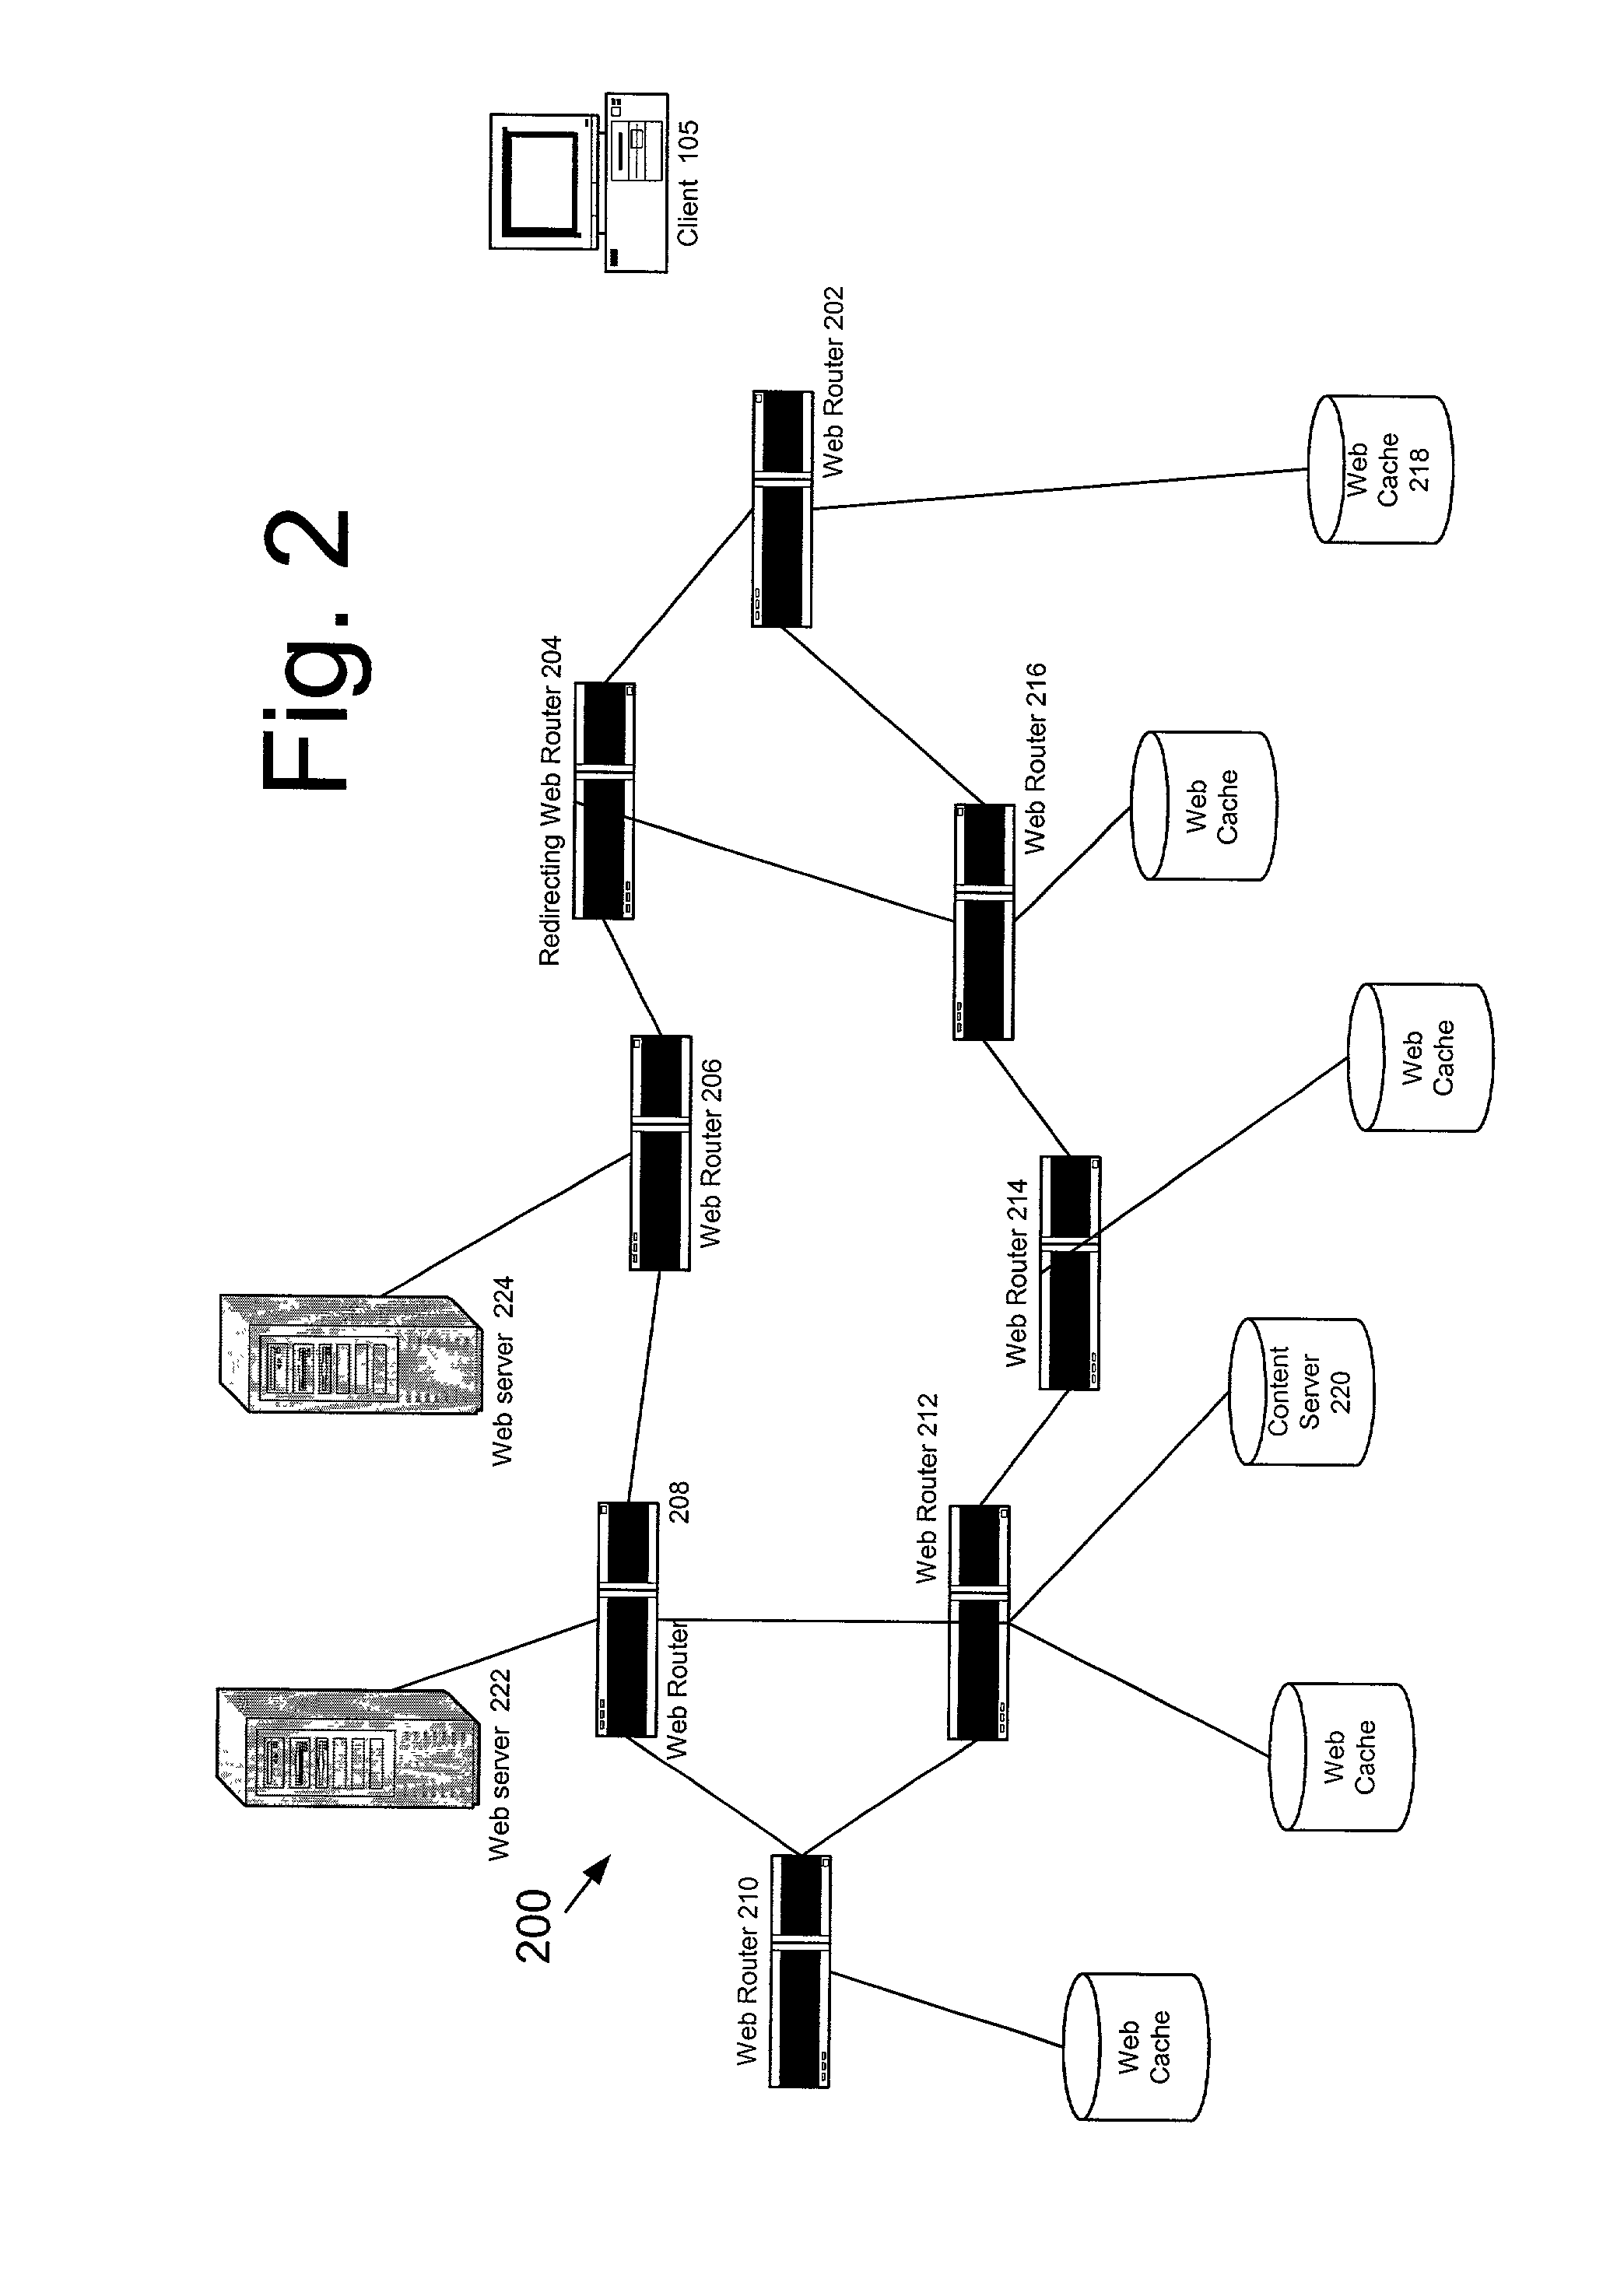 System and method for using uniform resource locators to map application layer content names to network layer anycast addresses